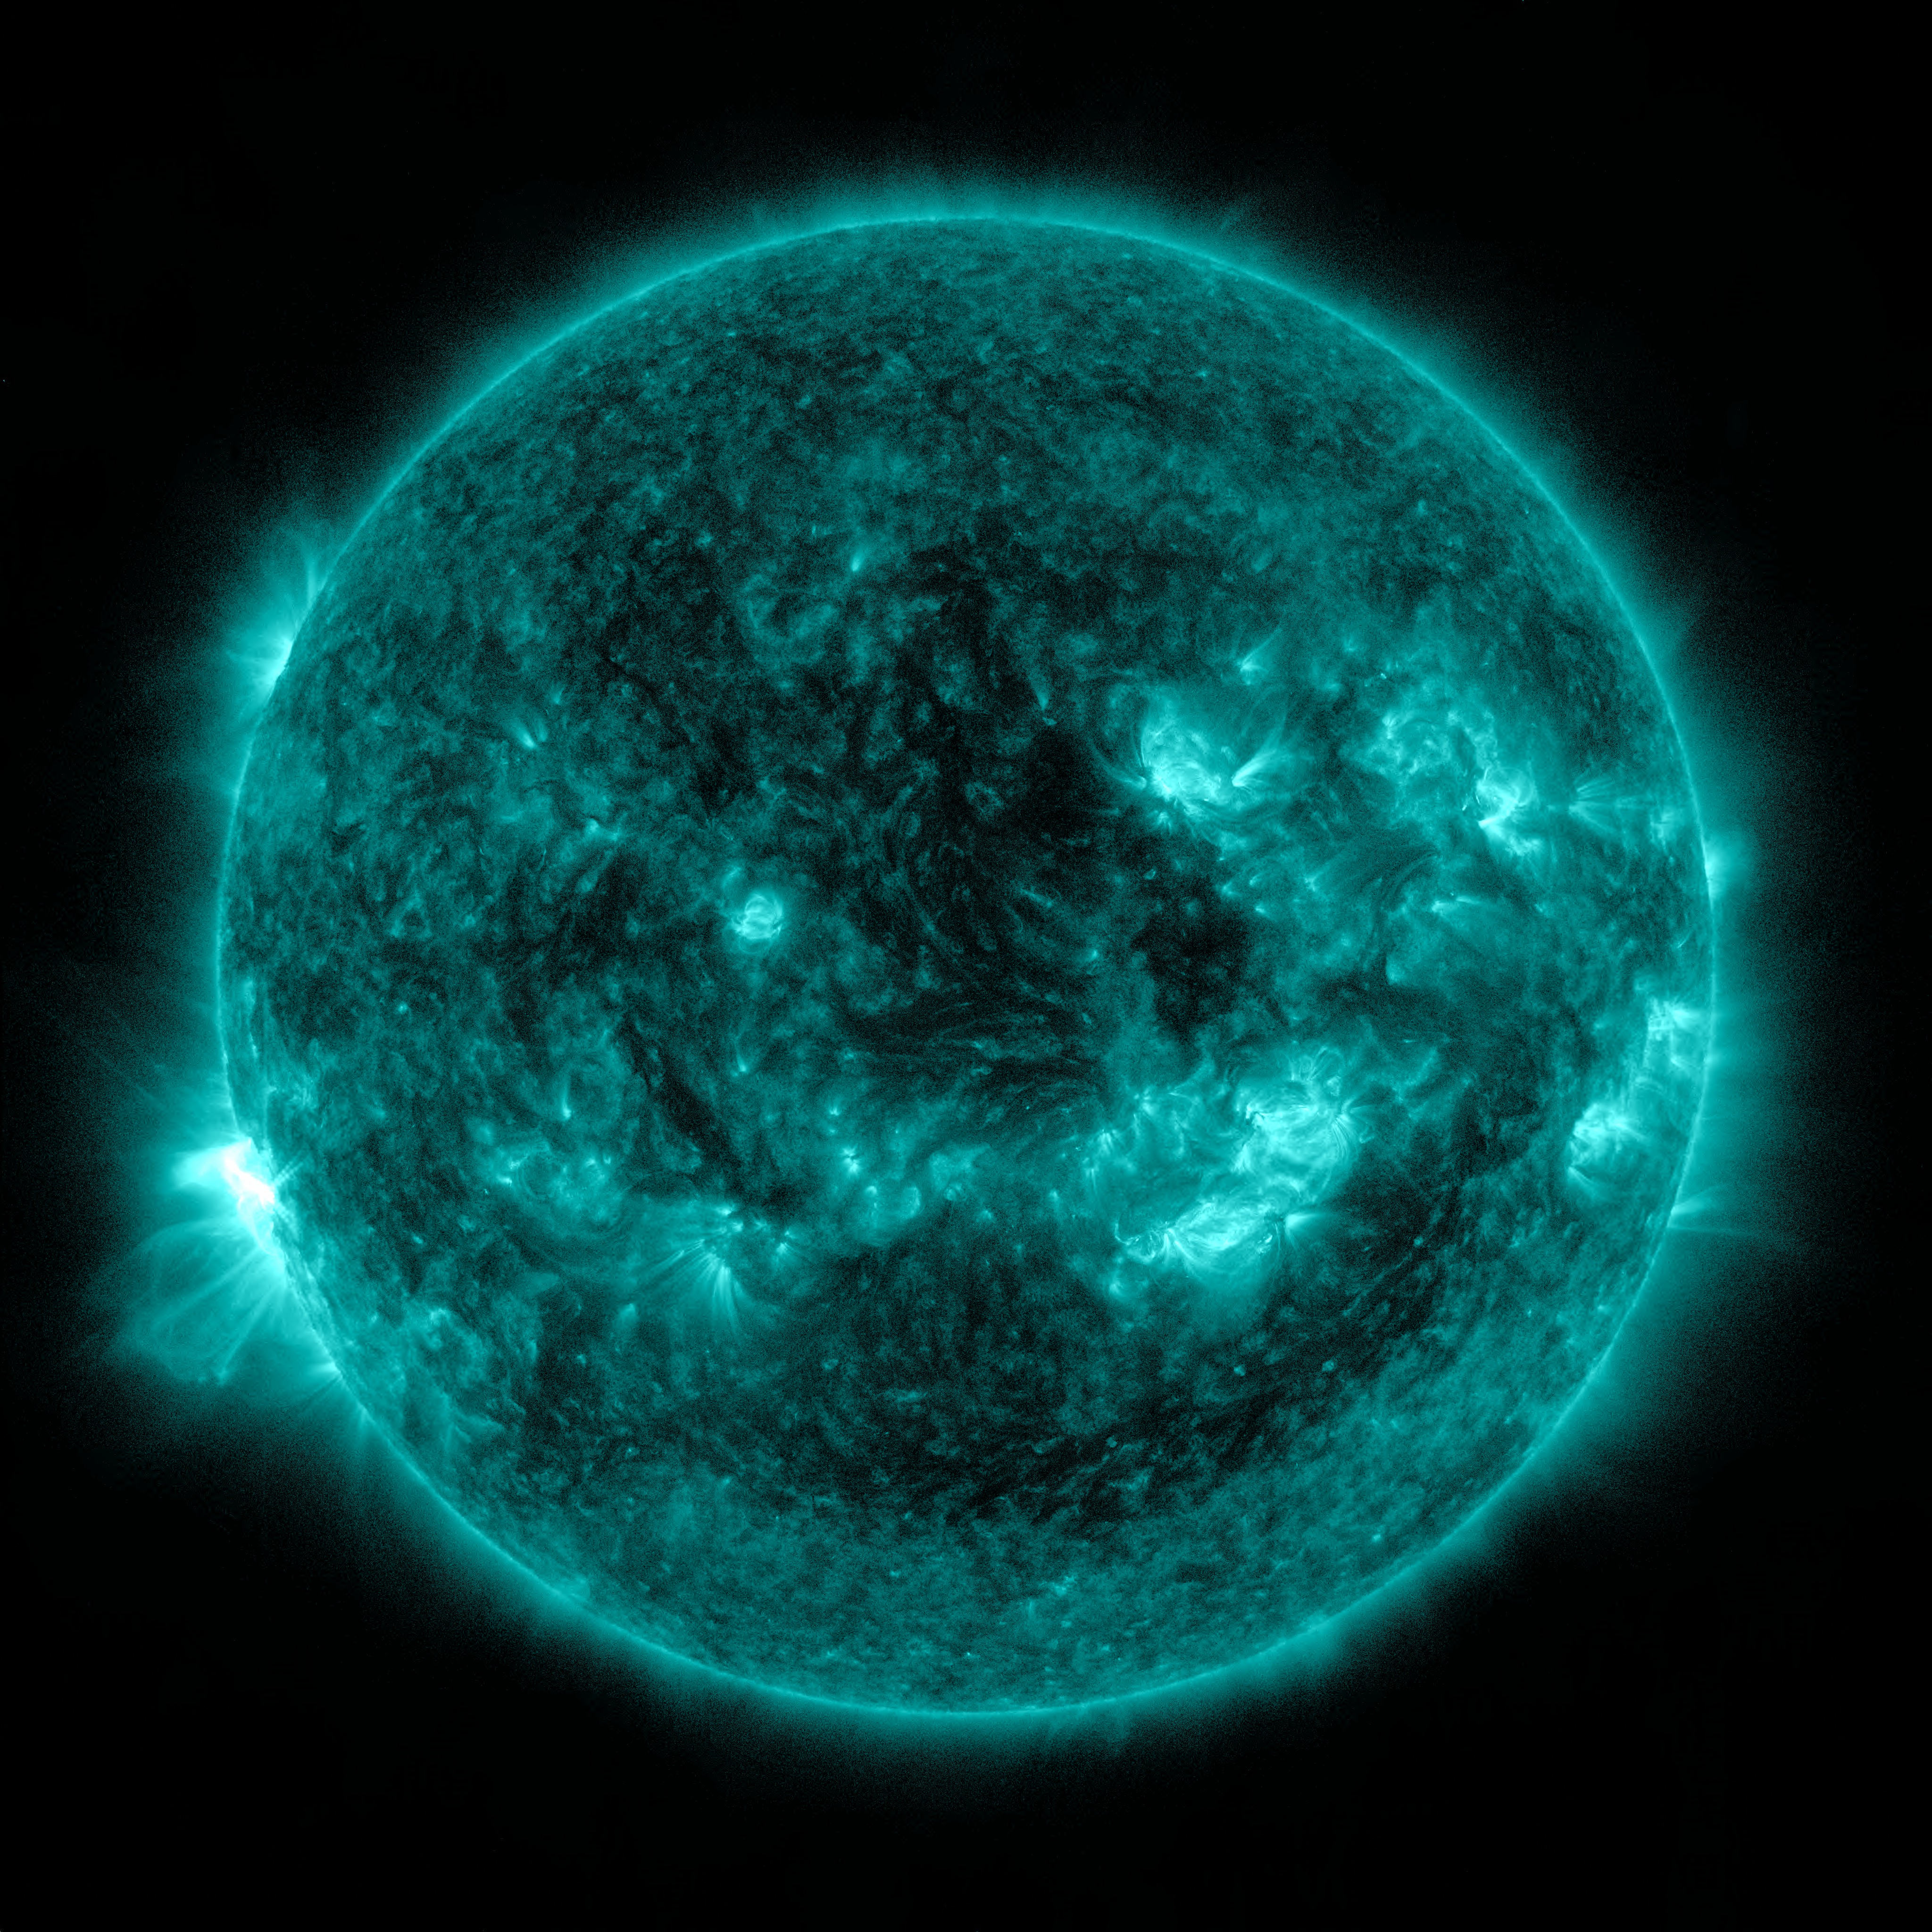 4k video and frames of the first two flares in 131 angstrom light.Credit: NASA/Goddard/SDO